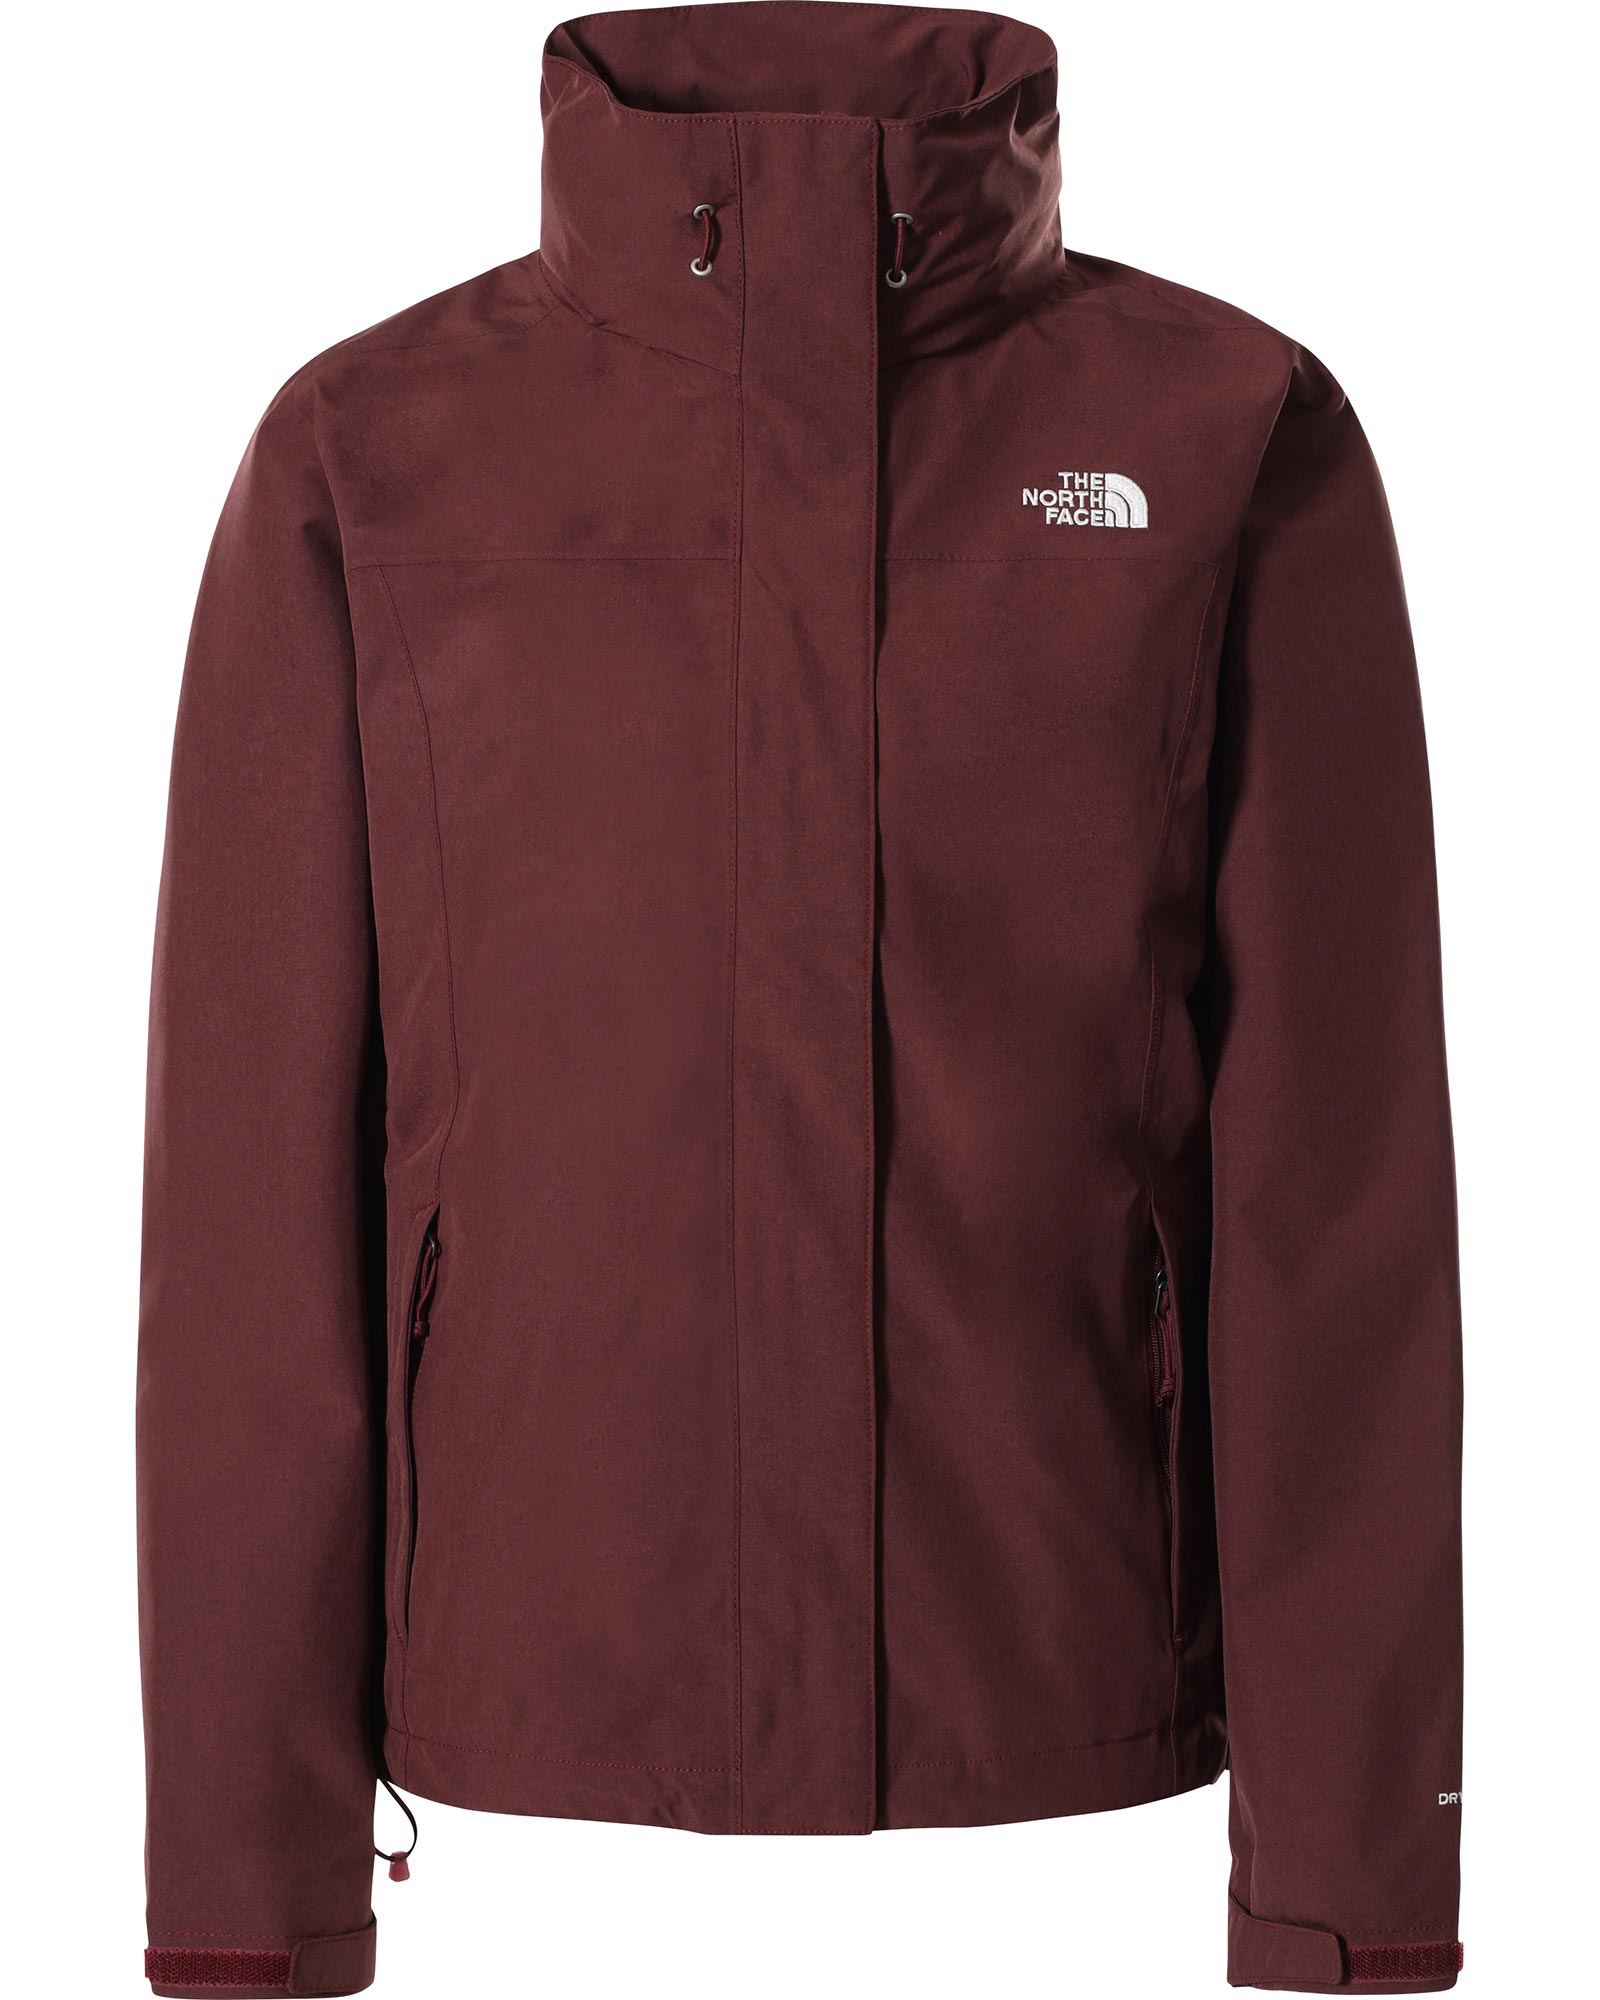 The North Face Sangro DryVent Women’s Jacket - Regal Red Heather XS